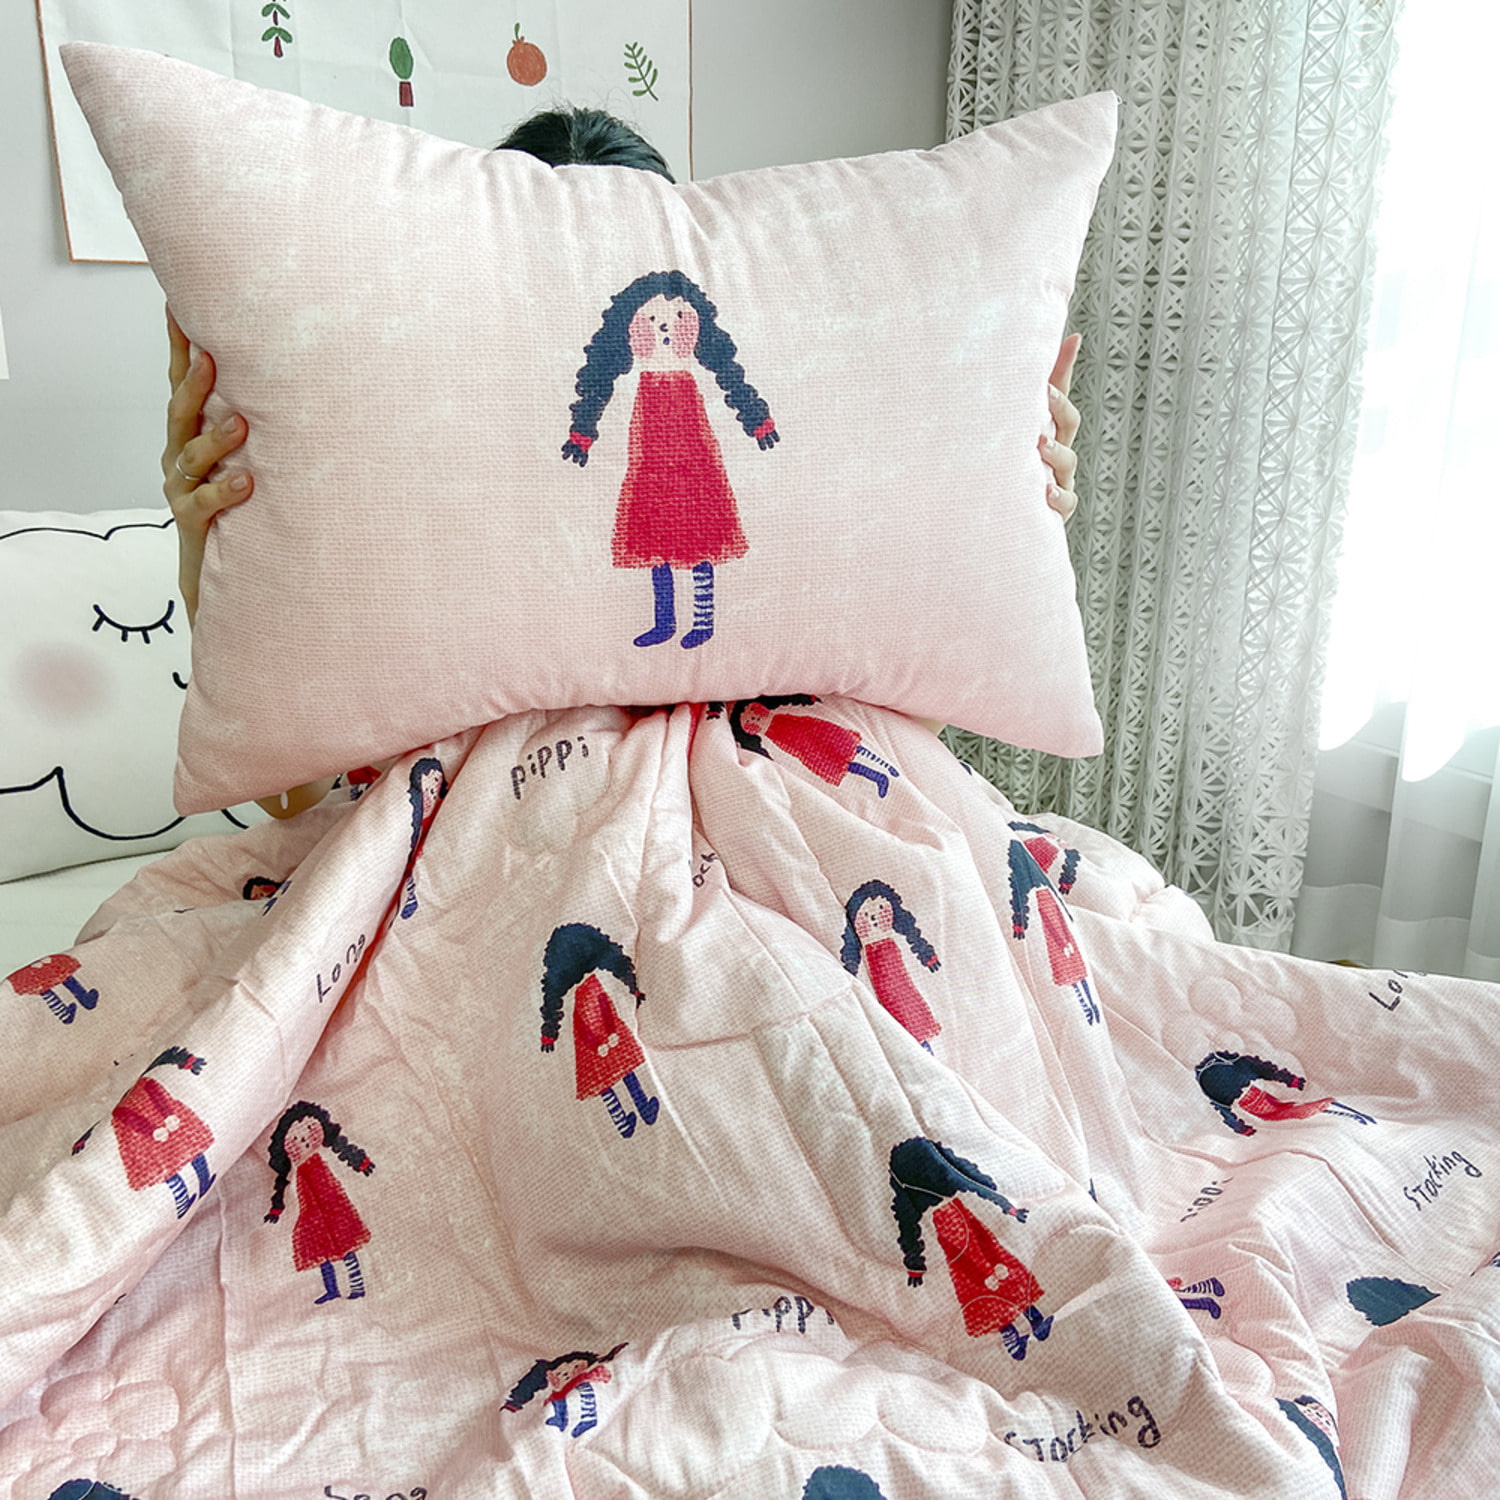 [drawing AMY] Pippi Long Stocking four seasons bed comforter set